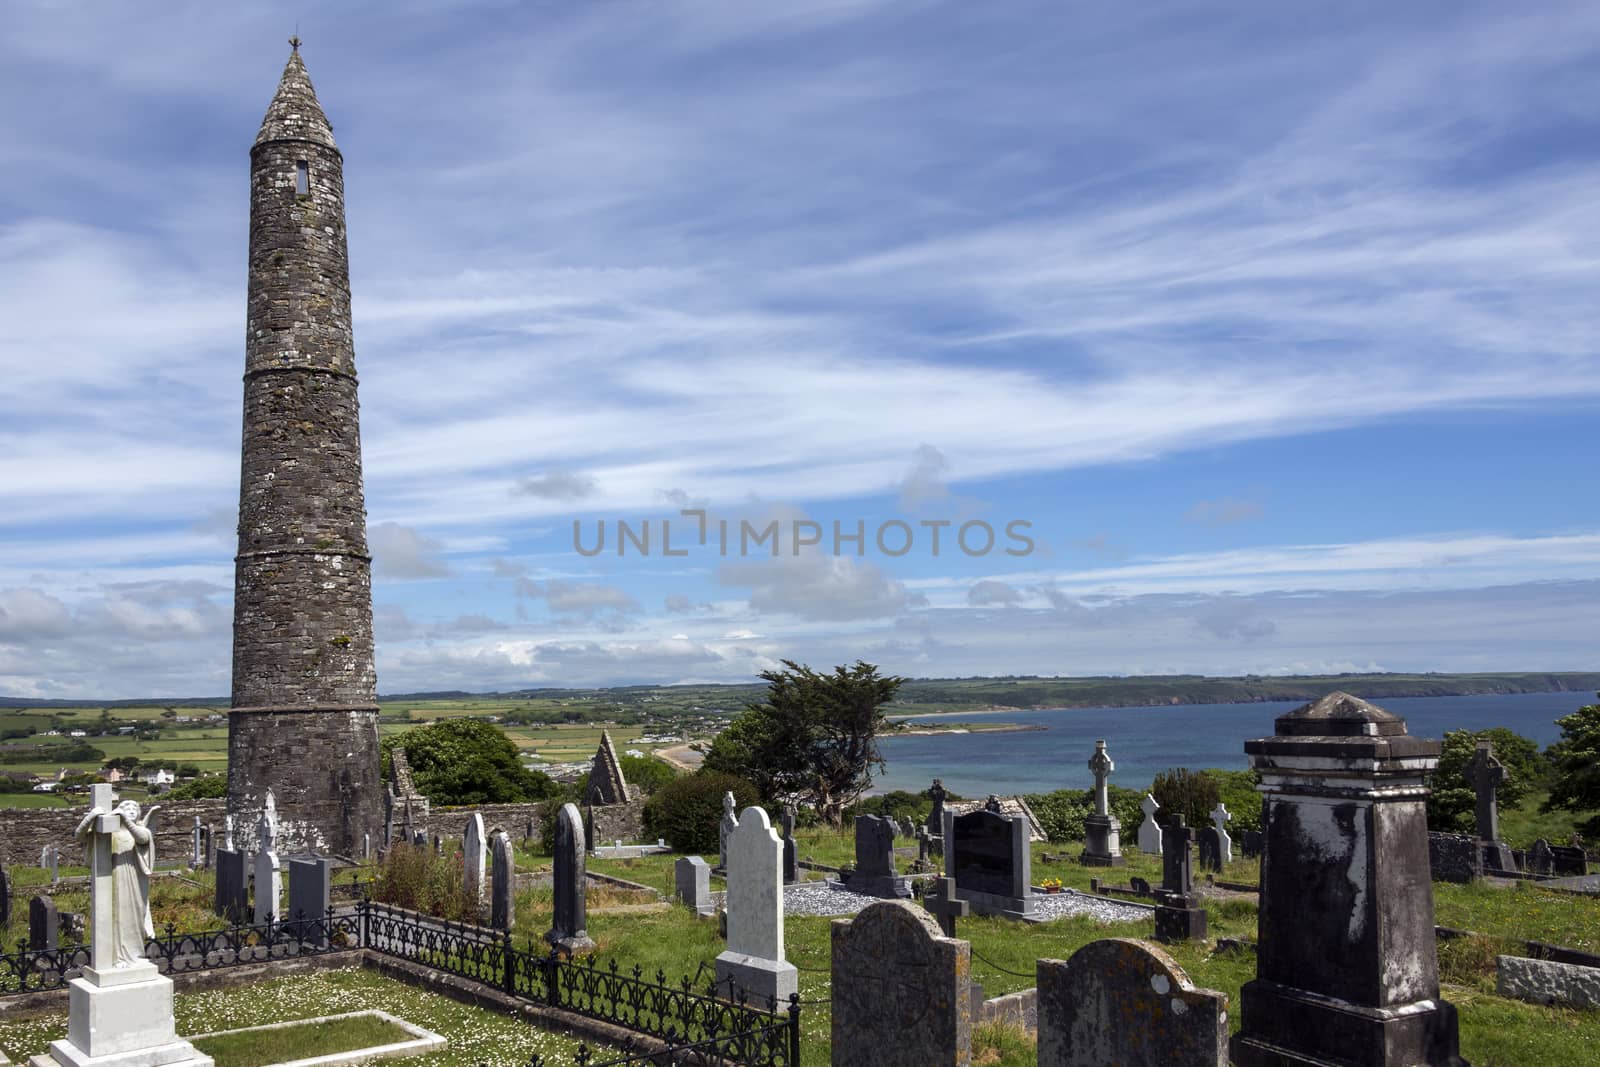 The ruins of Ardmore Cathedral and round tower, County Waterford in the Republic of Ireland. On a hill above the village of Ardmore is a well-preserved 30m, 12th-century round tower and the ruins of a Cathedral dating from the 13th and and an oratory dating from the 8th centuries. The outer walls of the Cathedral features some stone carvings retrieved from an earlier 9th century building. The carvings include a very early image of a harp, images of Adam and Eve in the garden and a representation of Solomon's judgement.